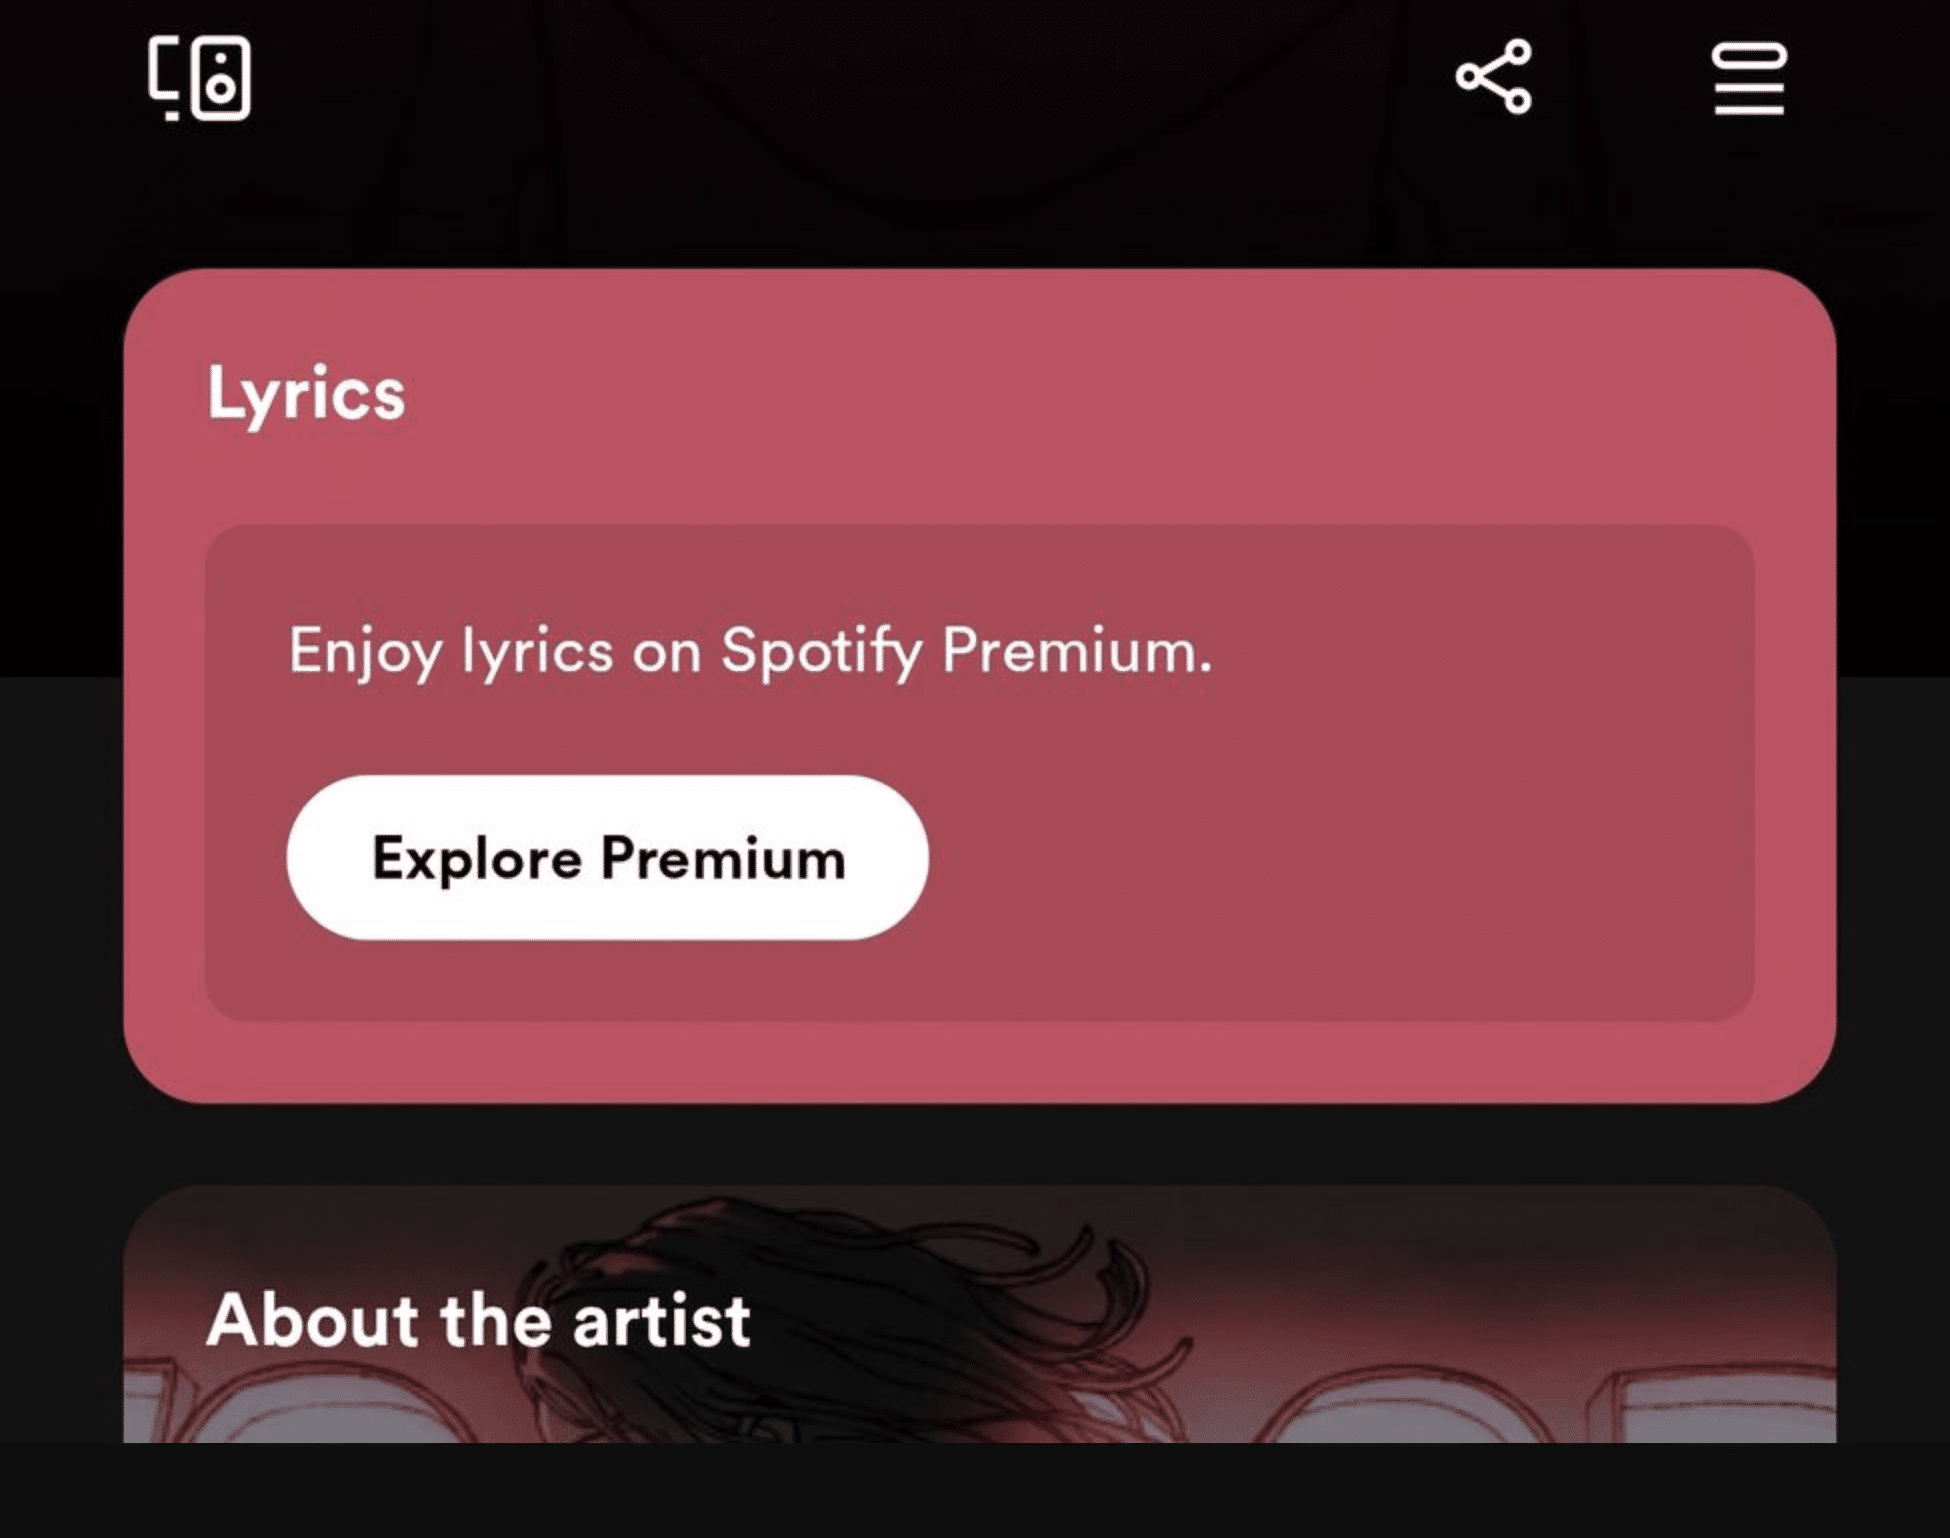 Lyrics could become a premium feature on Spotify